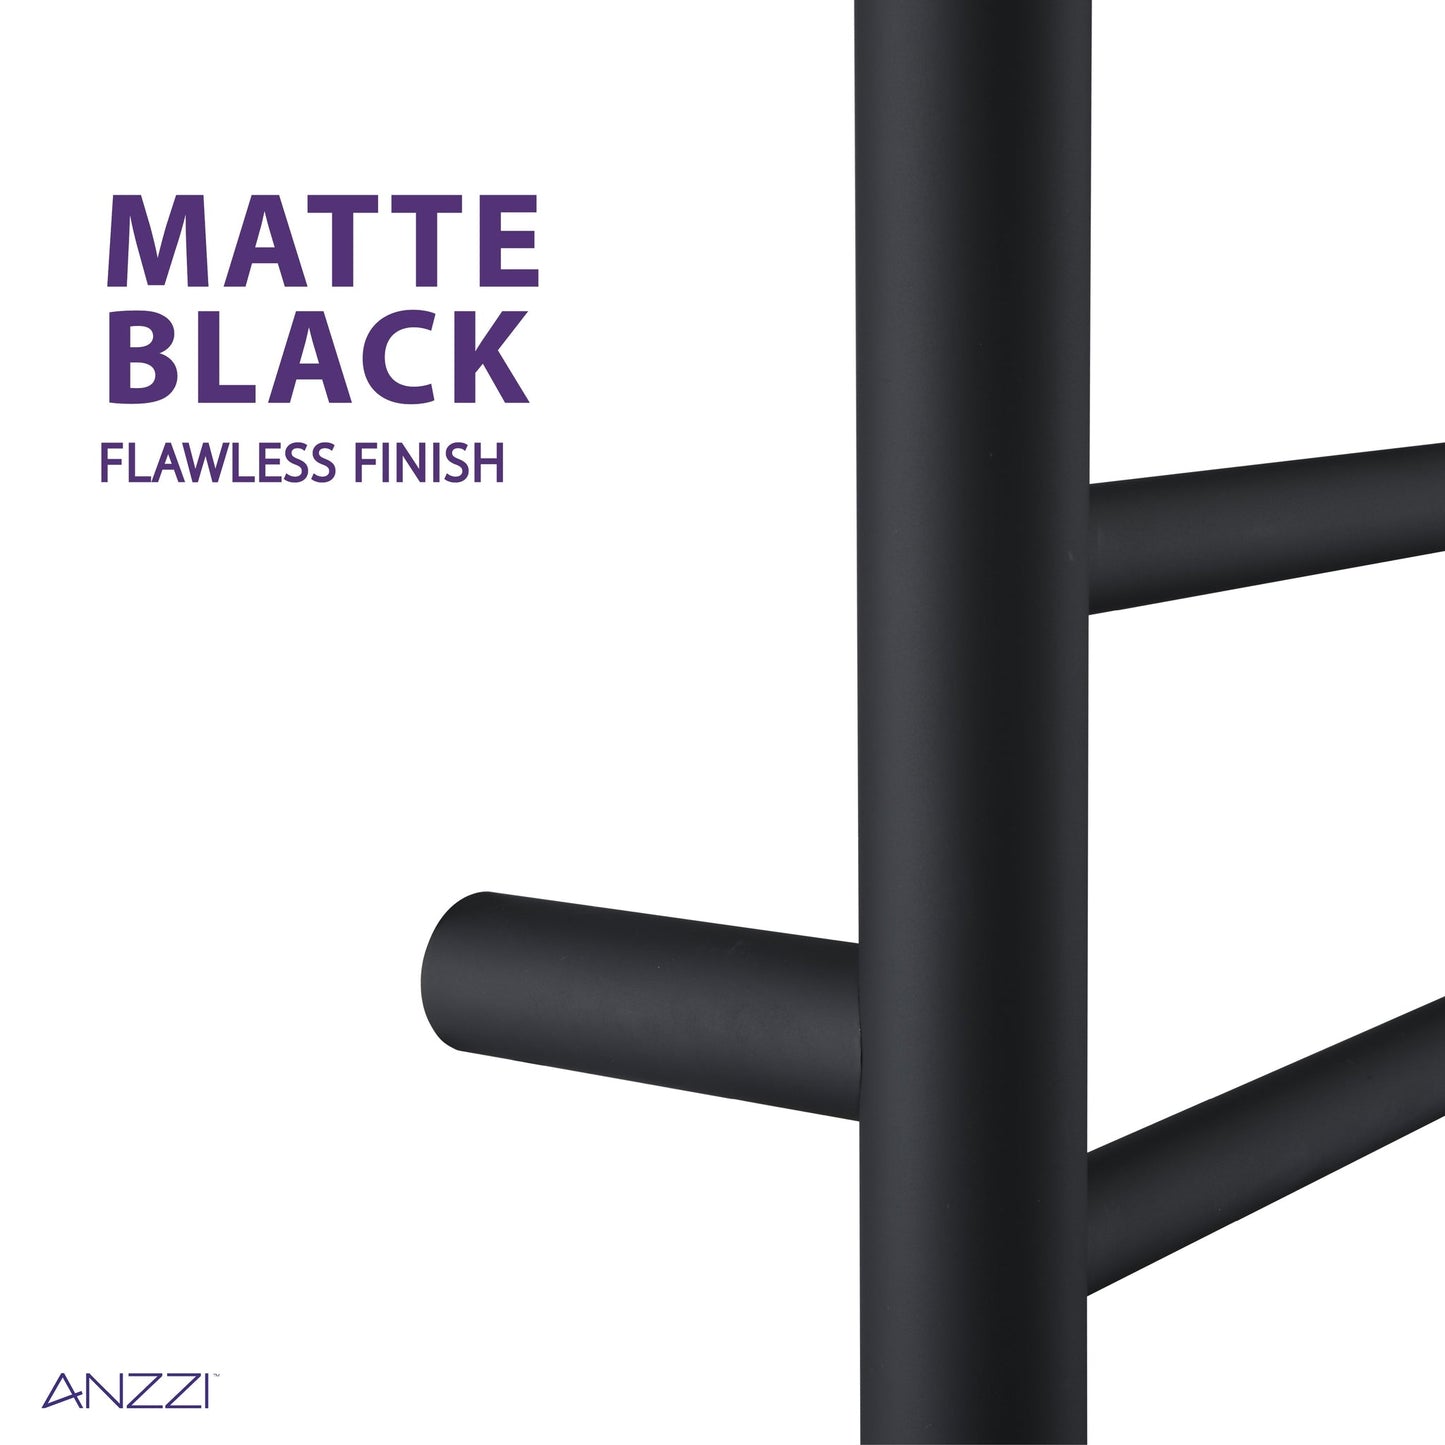 ANZZI Eve Series 8-Bar Stainless Steel Wall-Mounted Electric Towel Warmer Rack With Top Shelf in Matte Black Finish